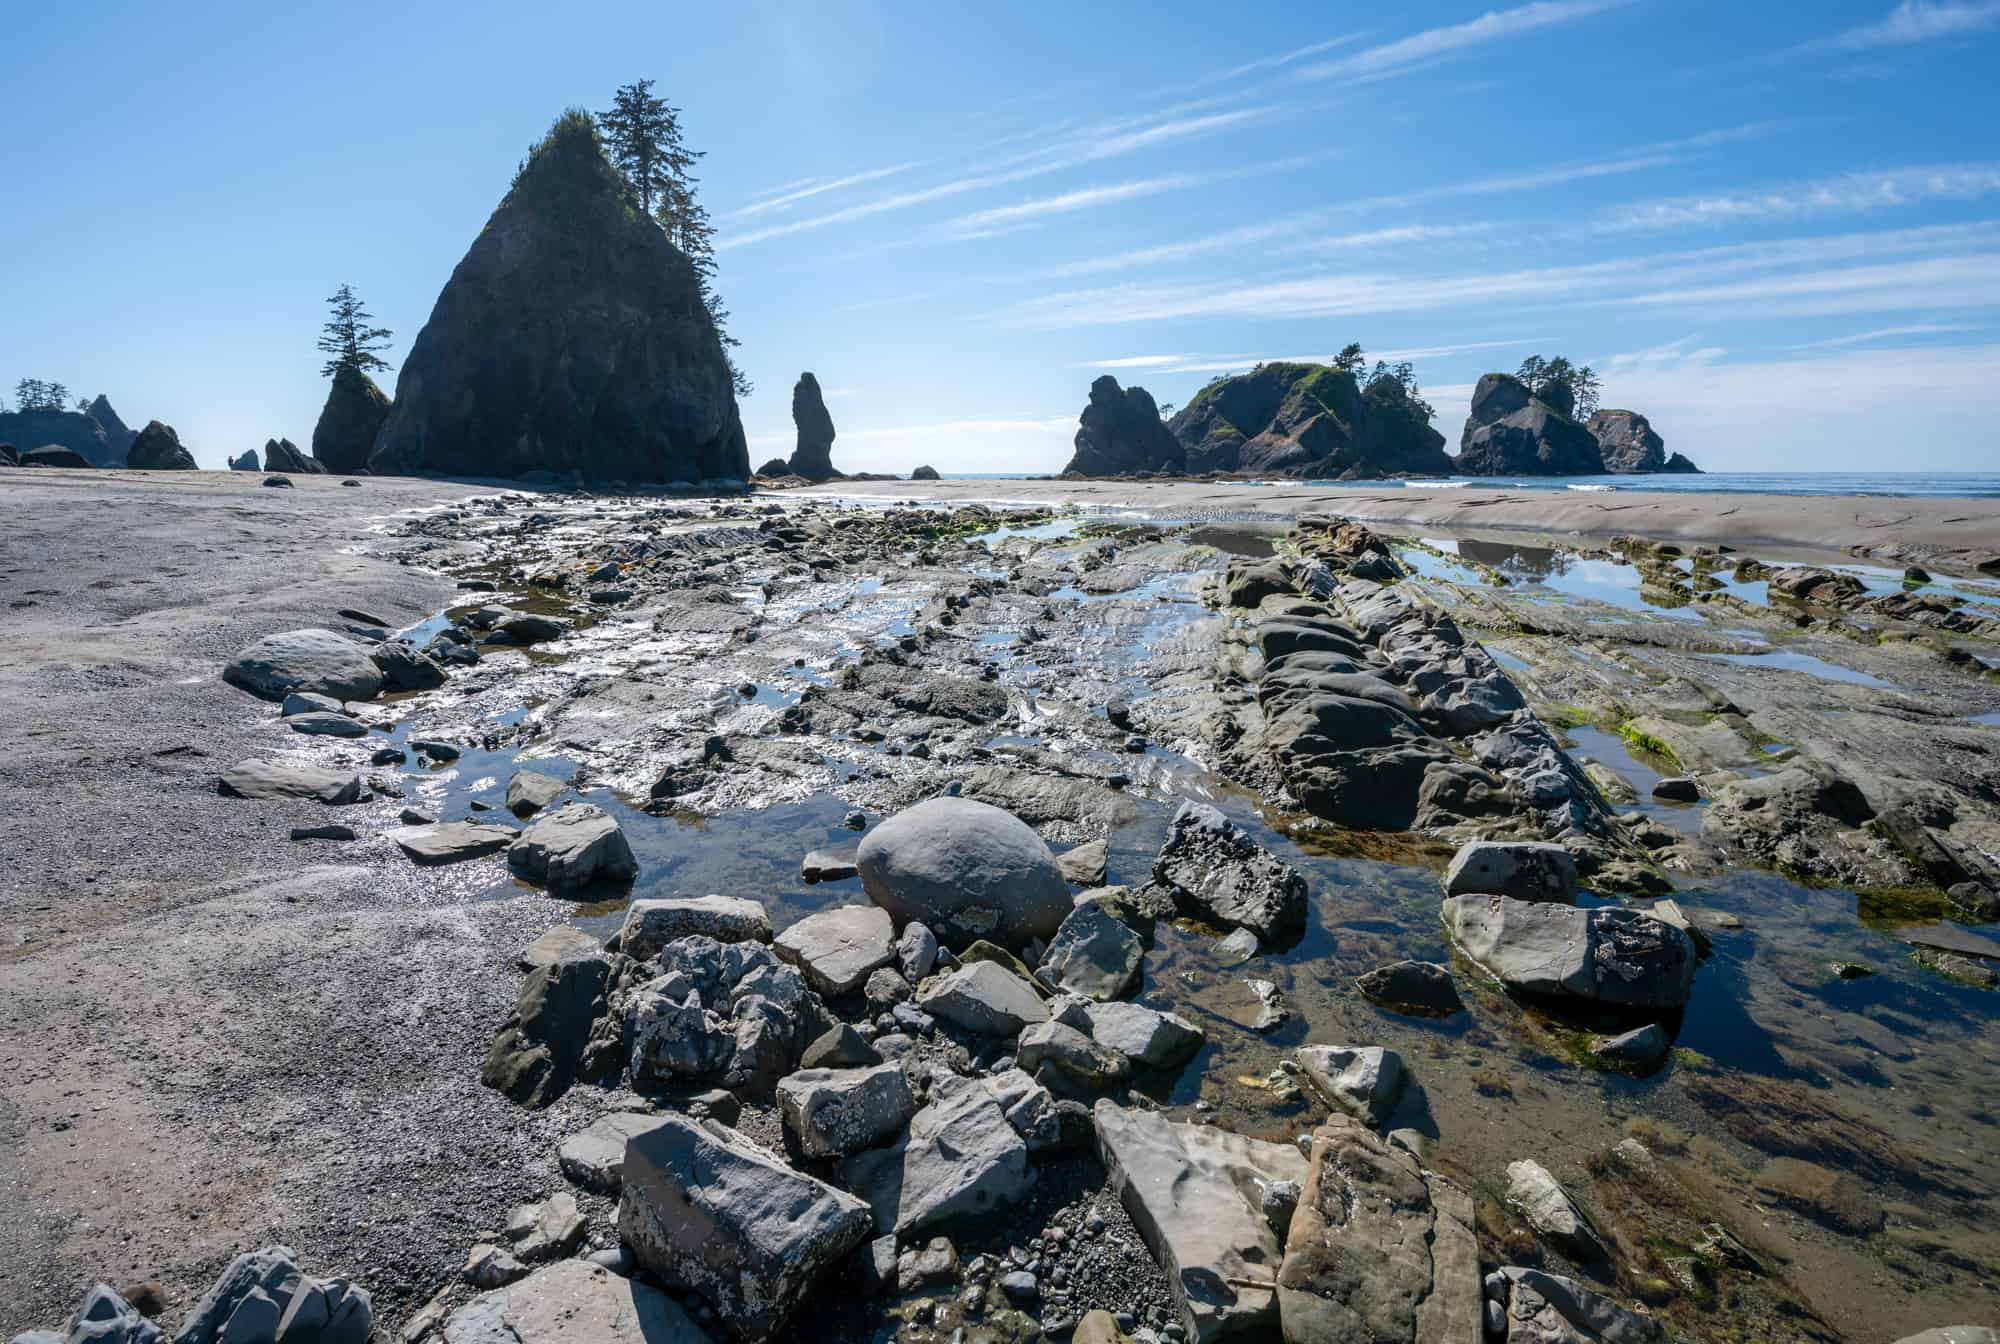 shi shi beach at low tide undercovers rocks and tide pools, sea stacks can be seen in the background under a blue sky